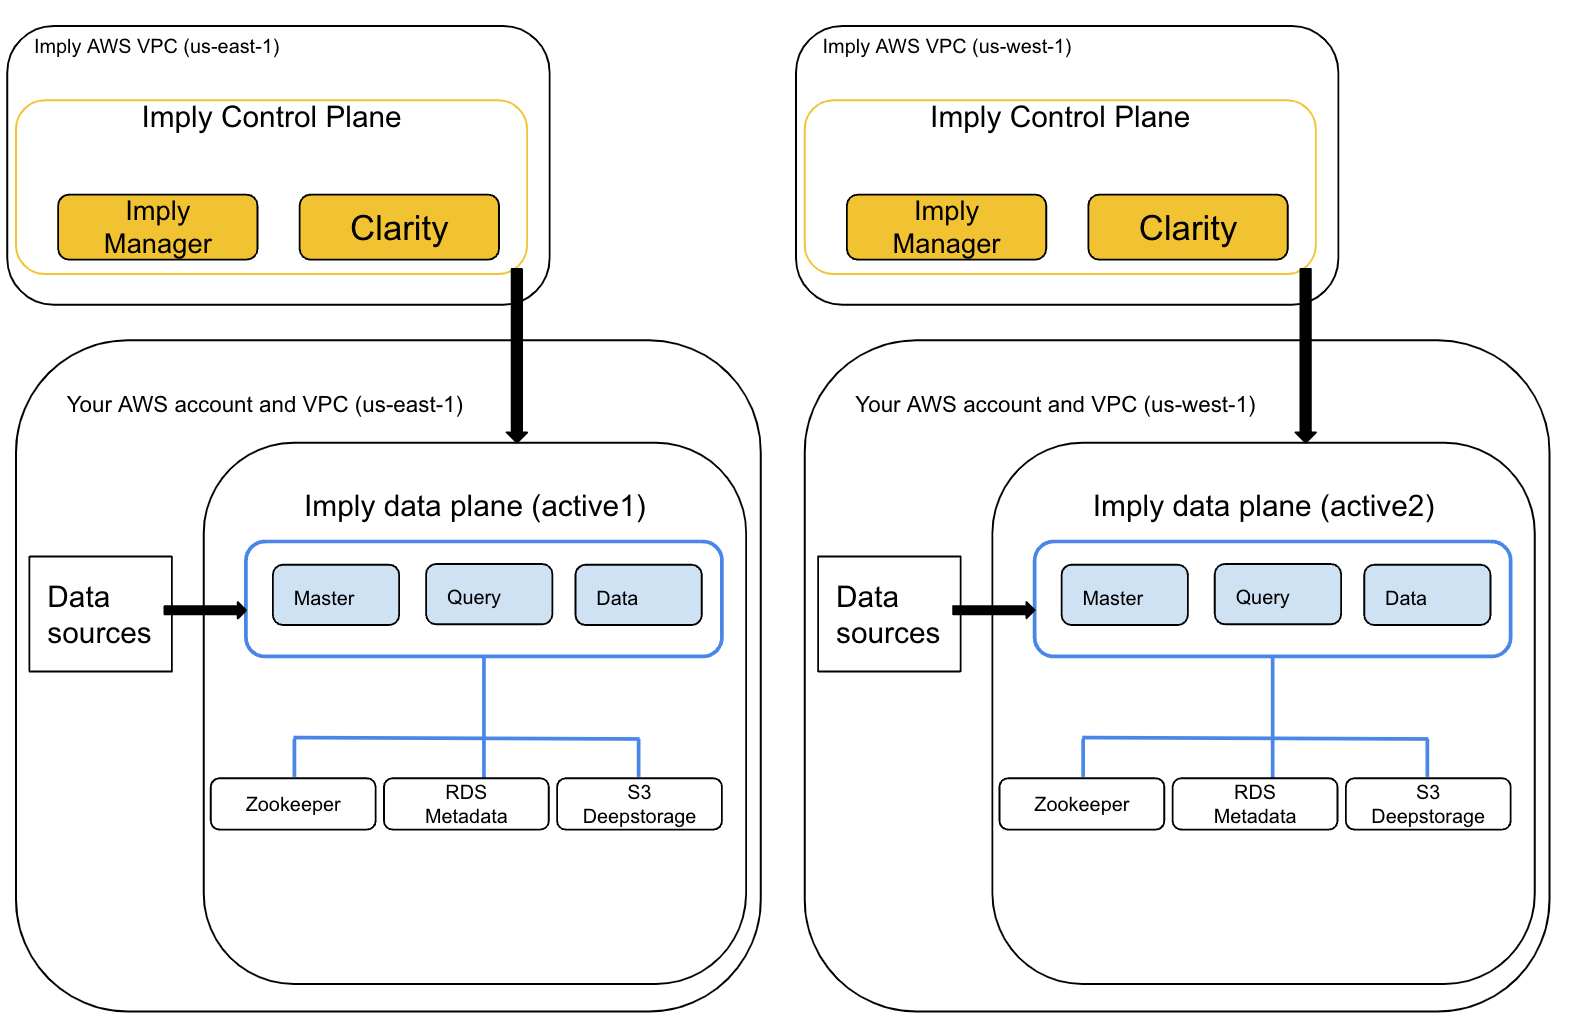 There are two Imply control planes running in Imply&#39;s AWS VPC in different regions. For the data plane, identical ones run in your VPC in different regions.